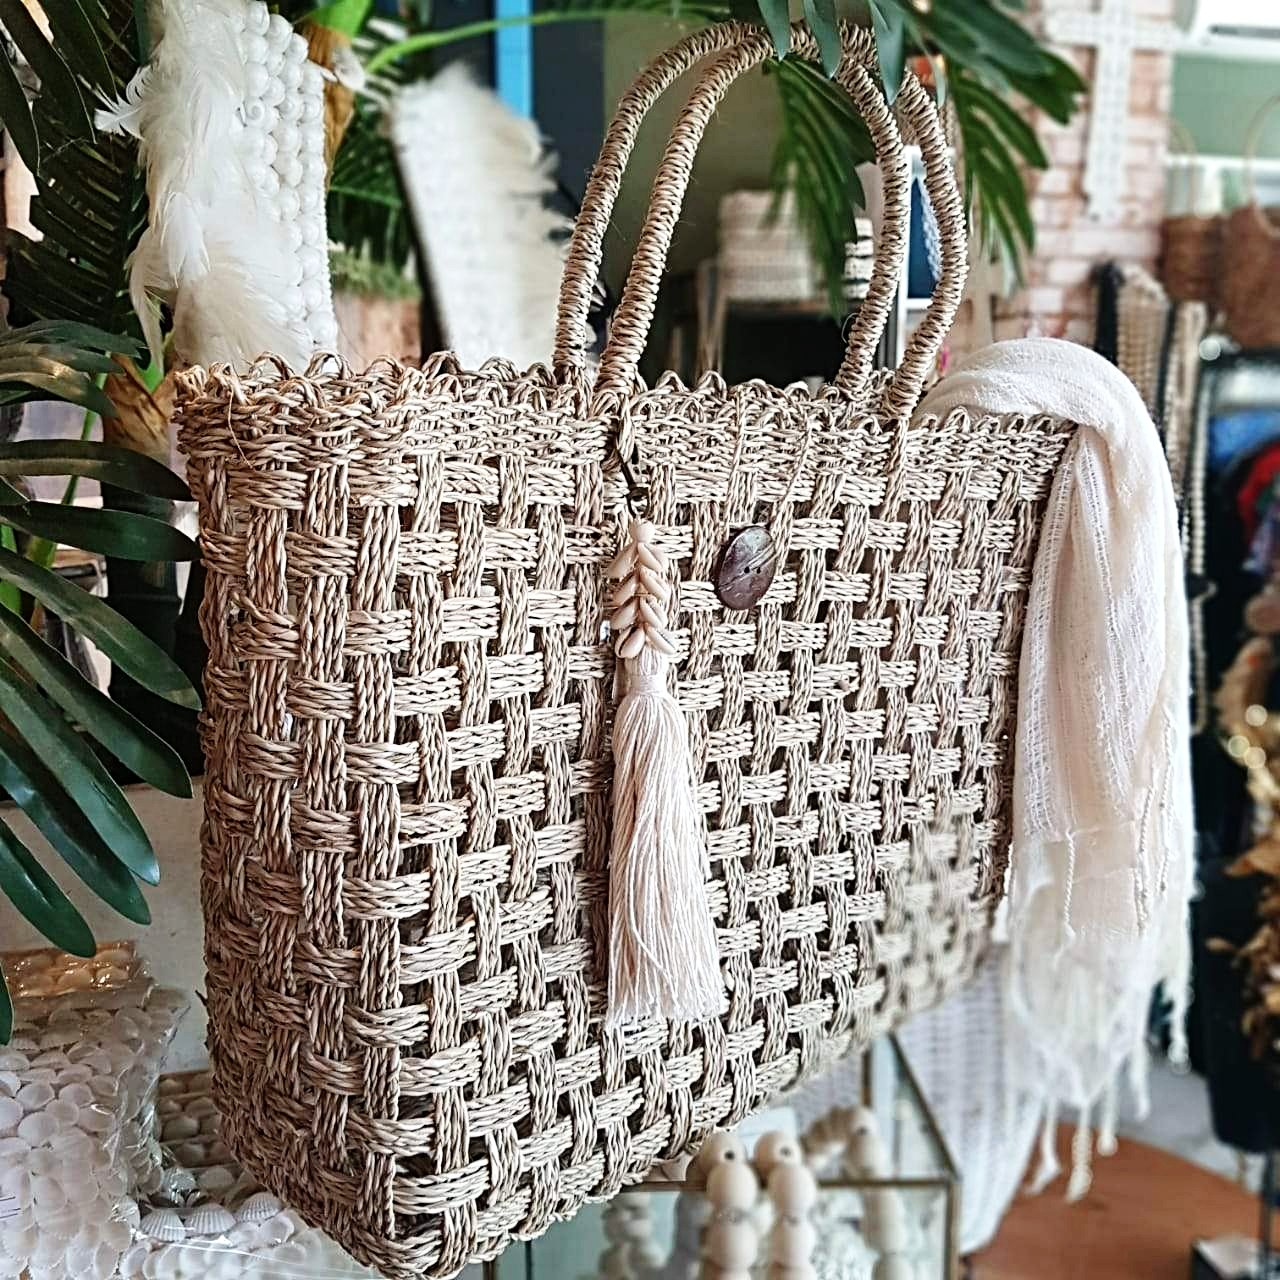 Organic Bag from Coconut Shell